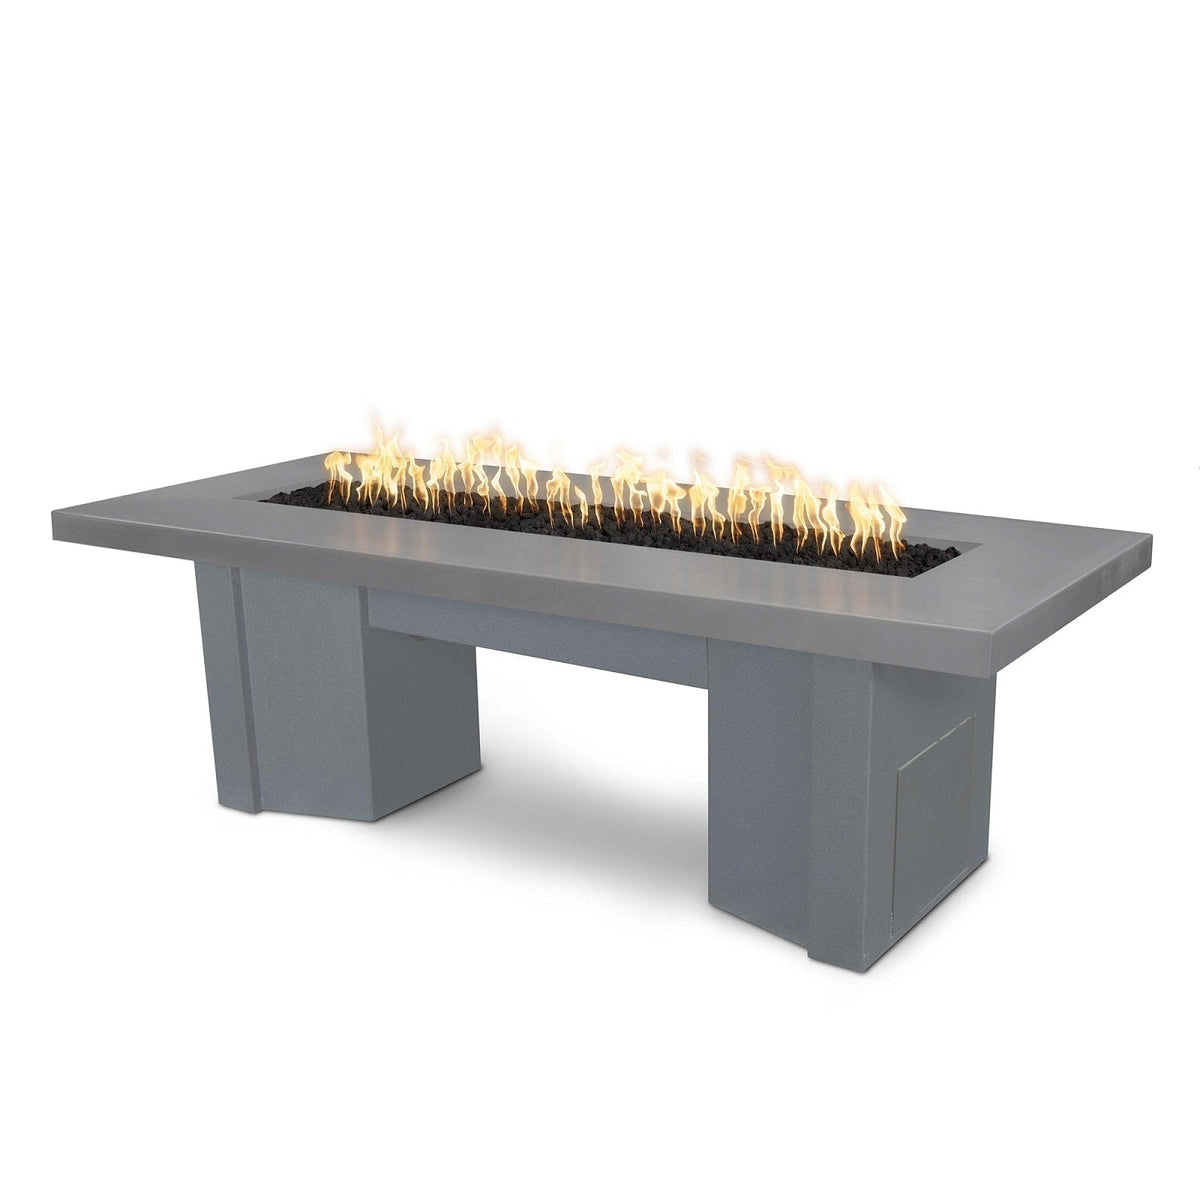 The Outdoor Plus Fire Features Natural Gray (-NGY) / Gray Powder Coated Steel (-GRY) The Outdoor Plus 78&quot; Alameda Fire Table Smooth Concrete in Liquid Propane - Flame Sense System with Push Button Spark Igniter / OPT-ALMGFRC78FSEN-LP